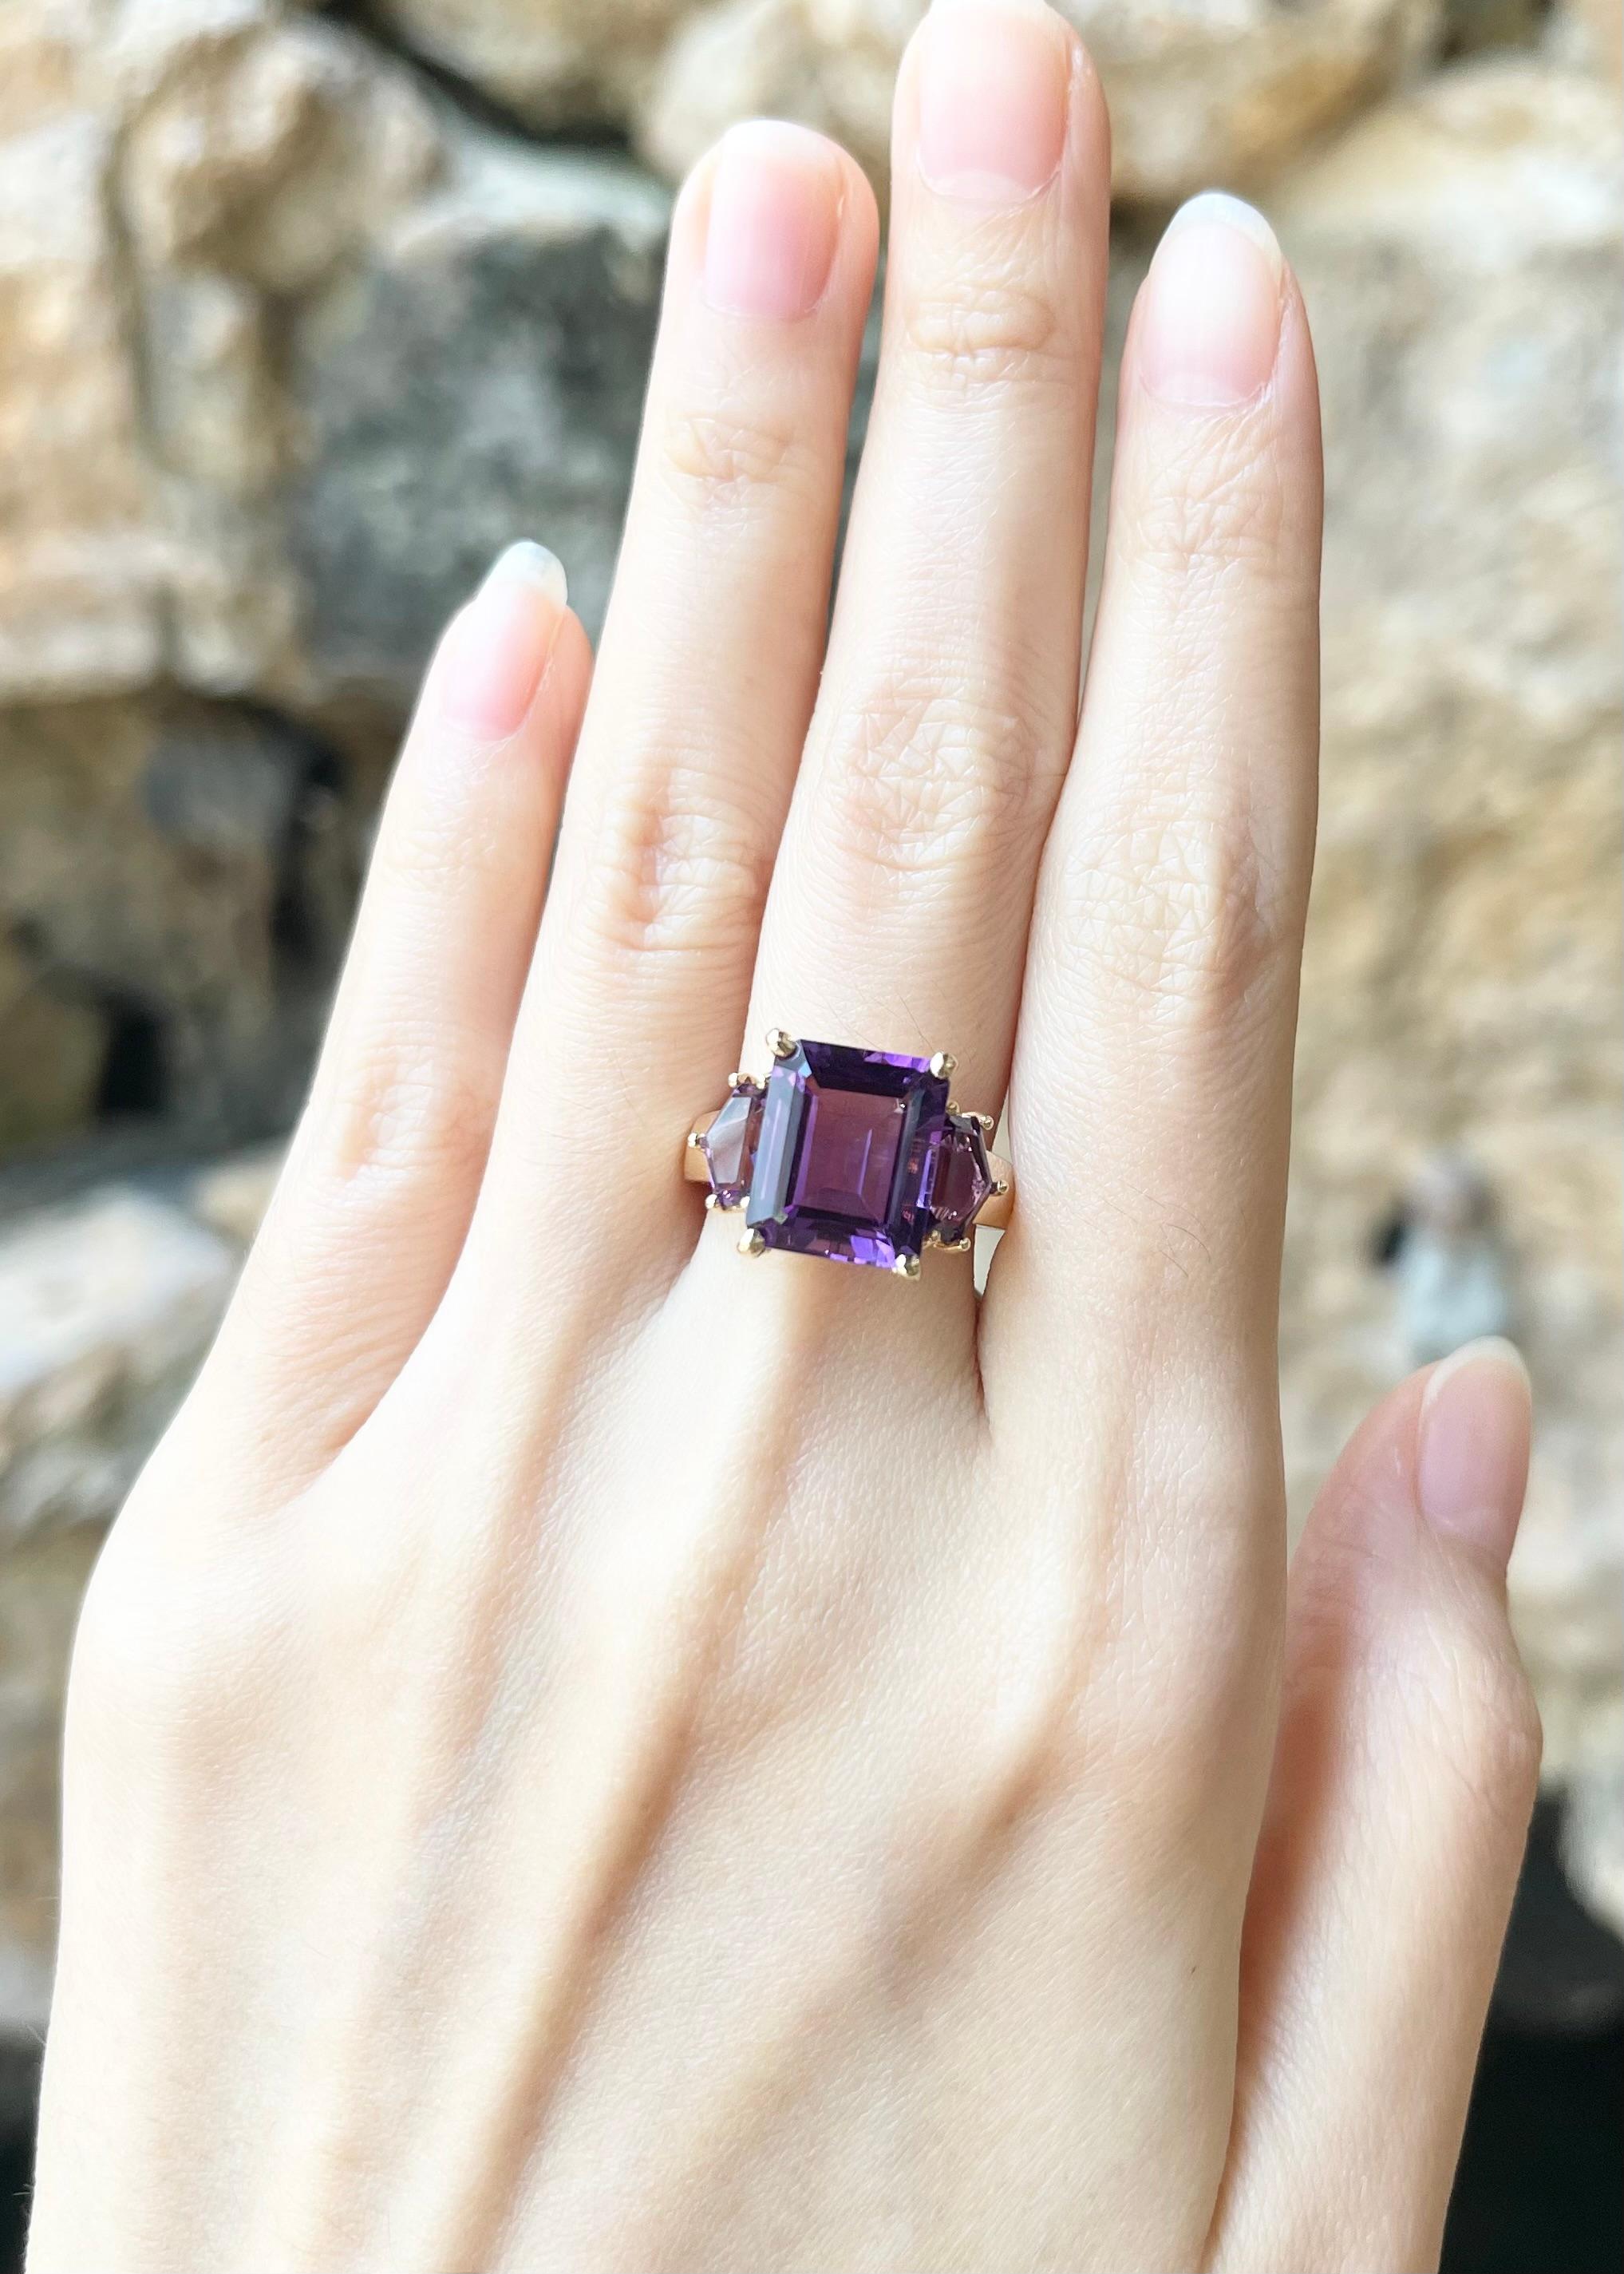 Amethyst 5.62 carats, Amethyst 1.62 carats Ring set in 14K Rose Gold Settings

Width:  1.7 cm 
Length: 1.2 cm
Ring Size: 53
Total Weight: 6.65 grams

